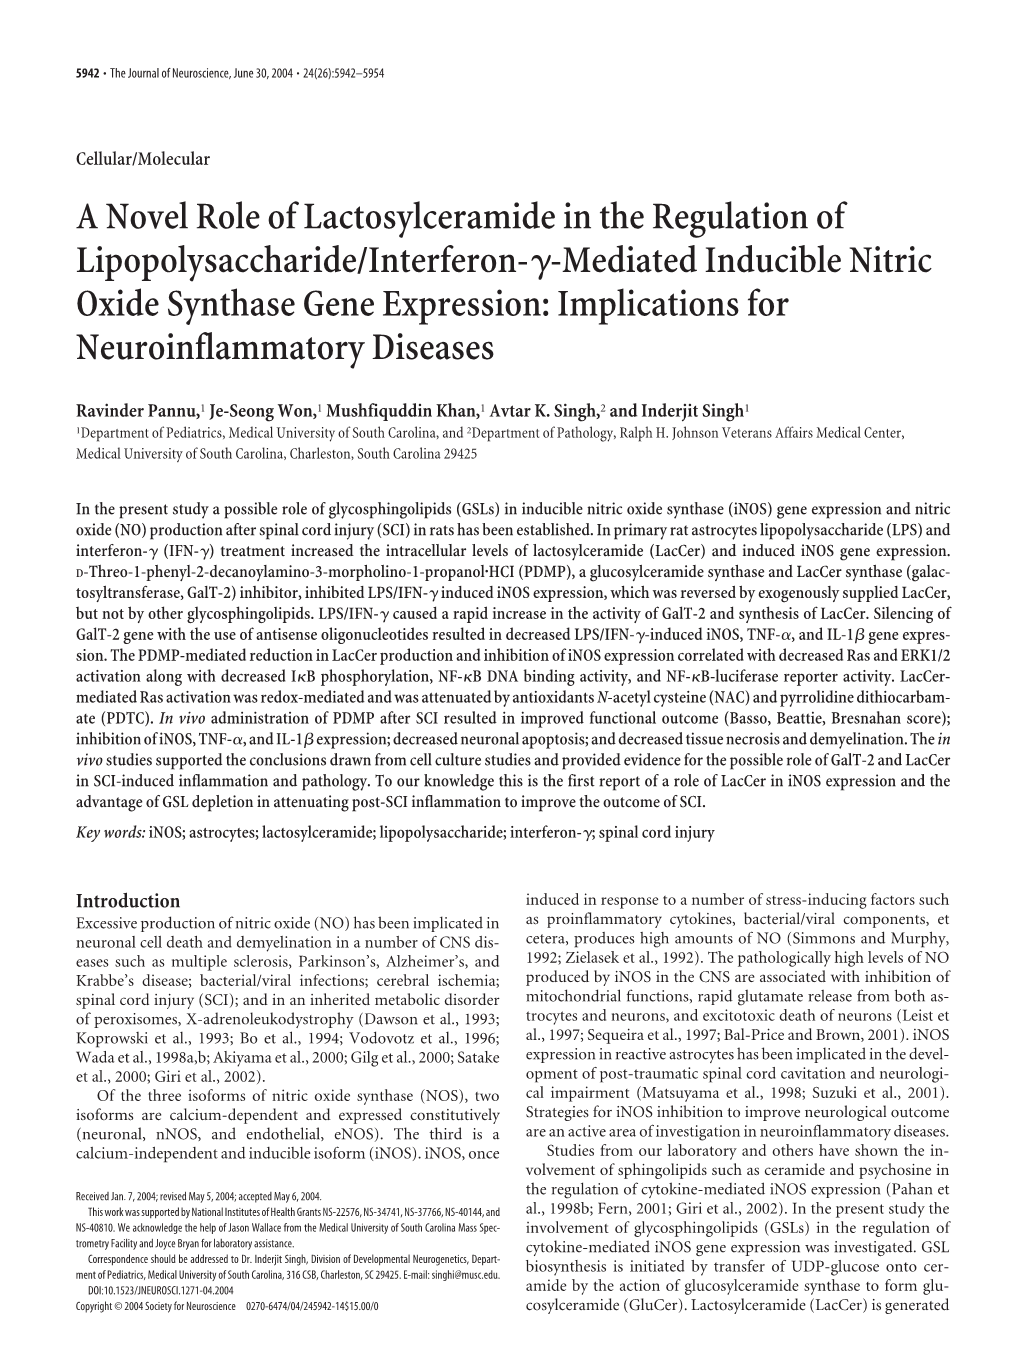 A Novel Role of Lactosylceramide in The